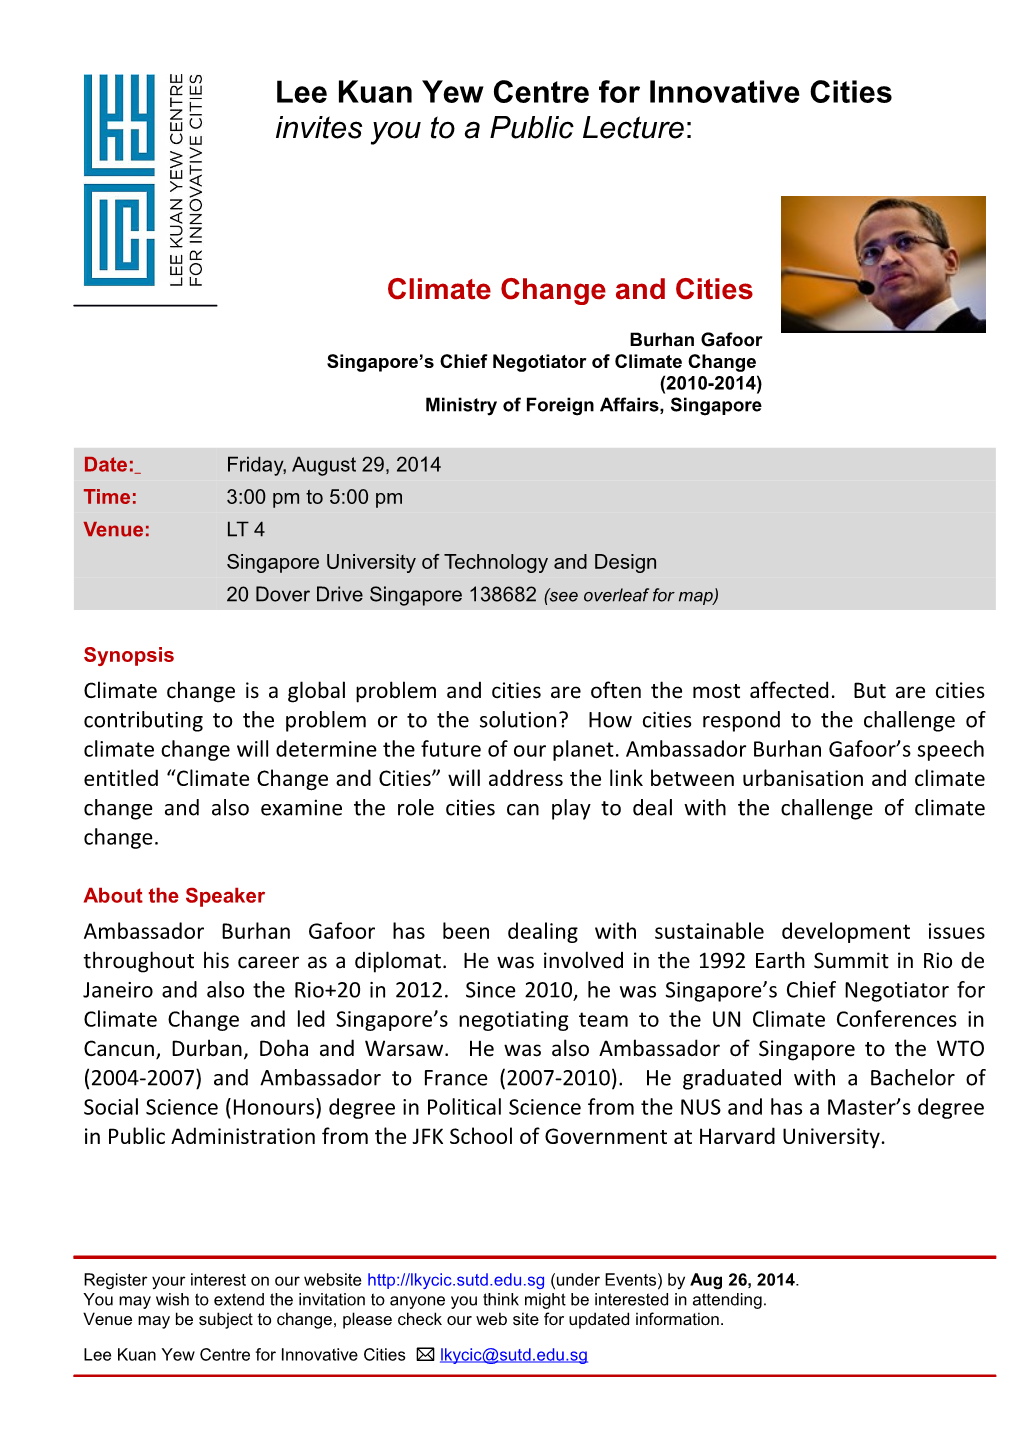 Climate Change and Cities